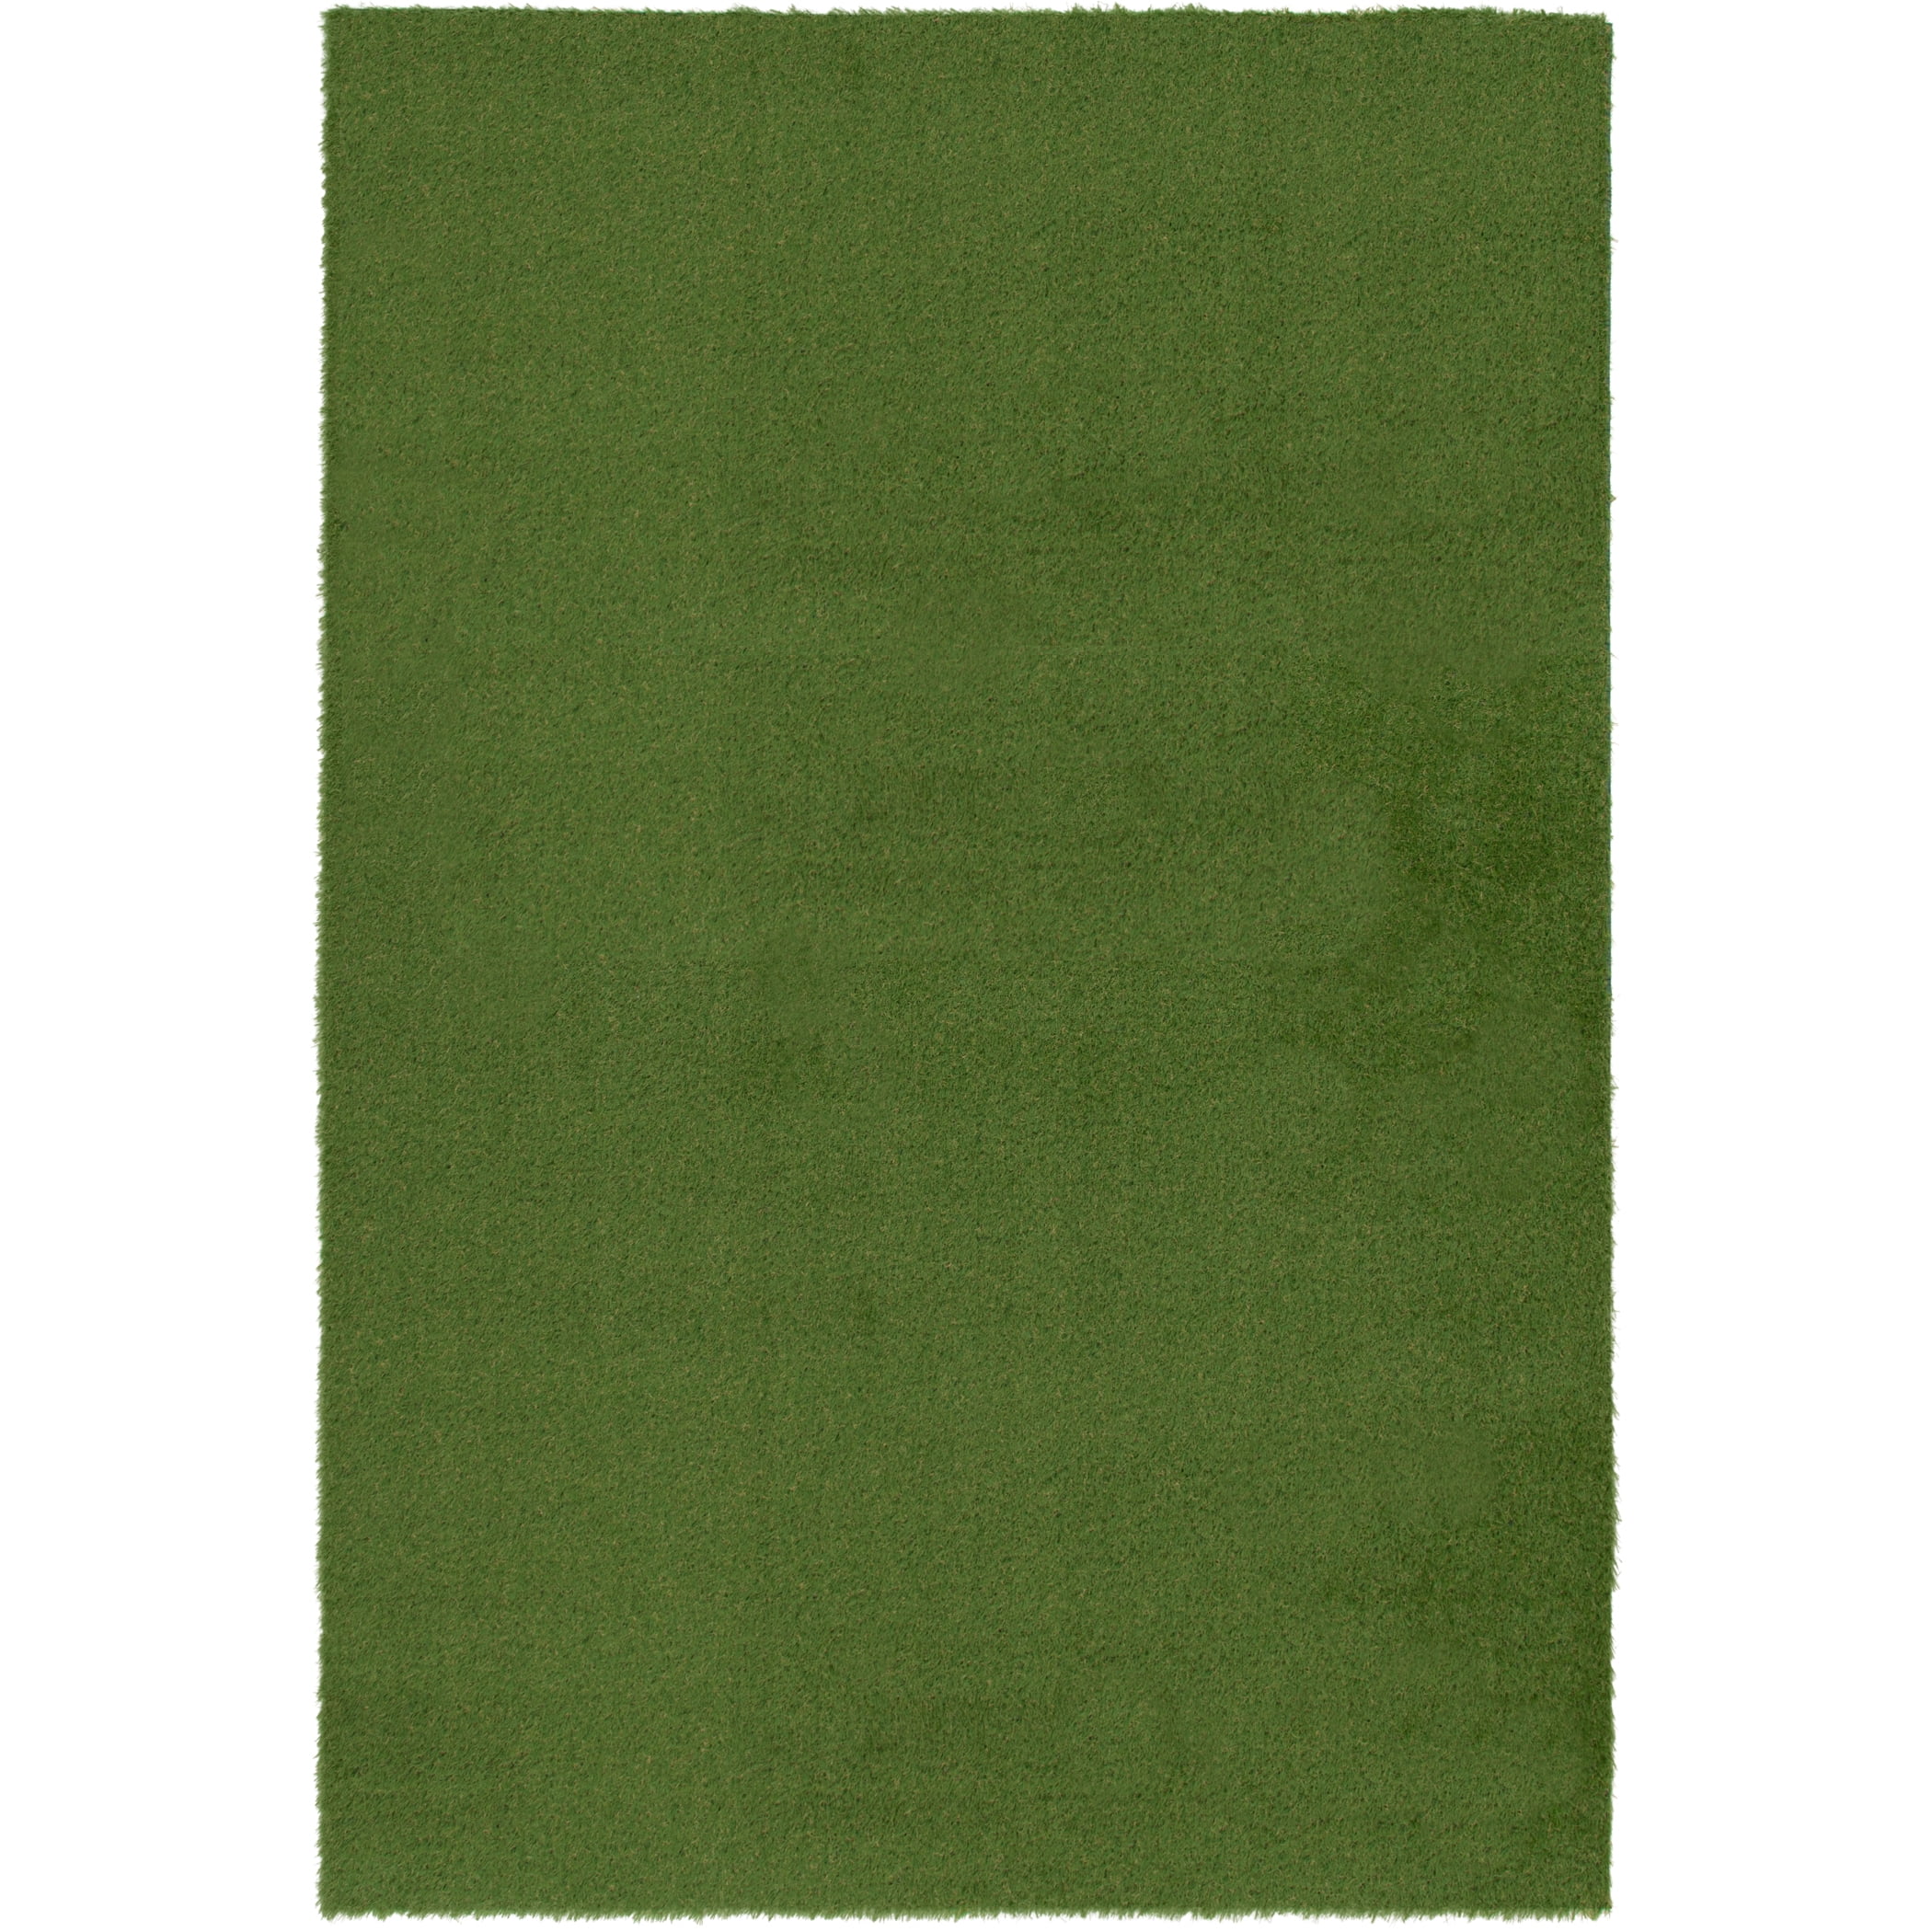 Mainstays 6' x 9' Faux Grass Outdoor Area Rug